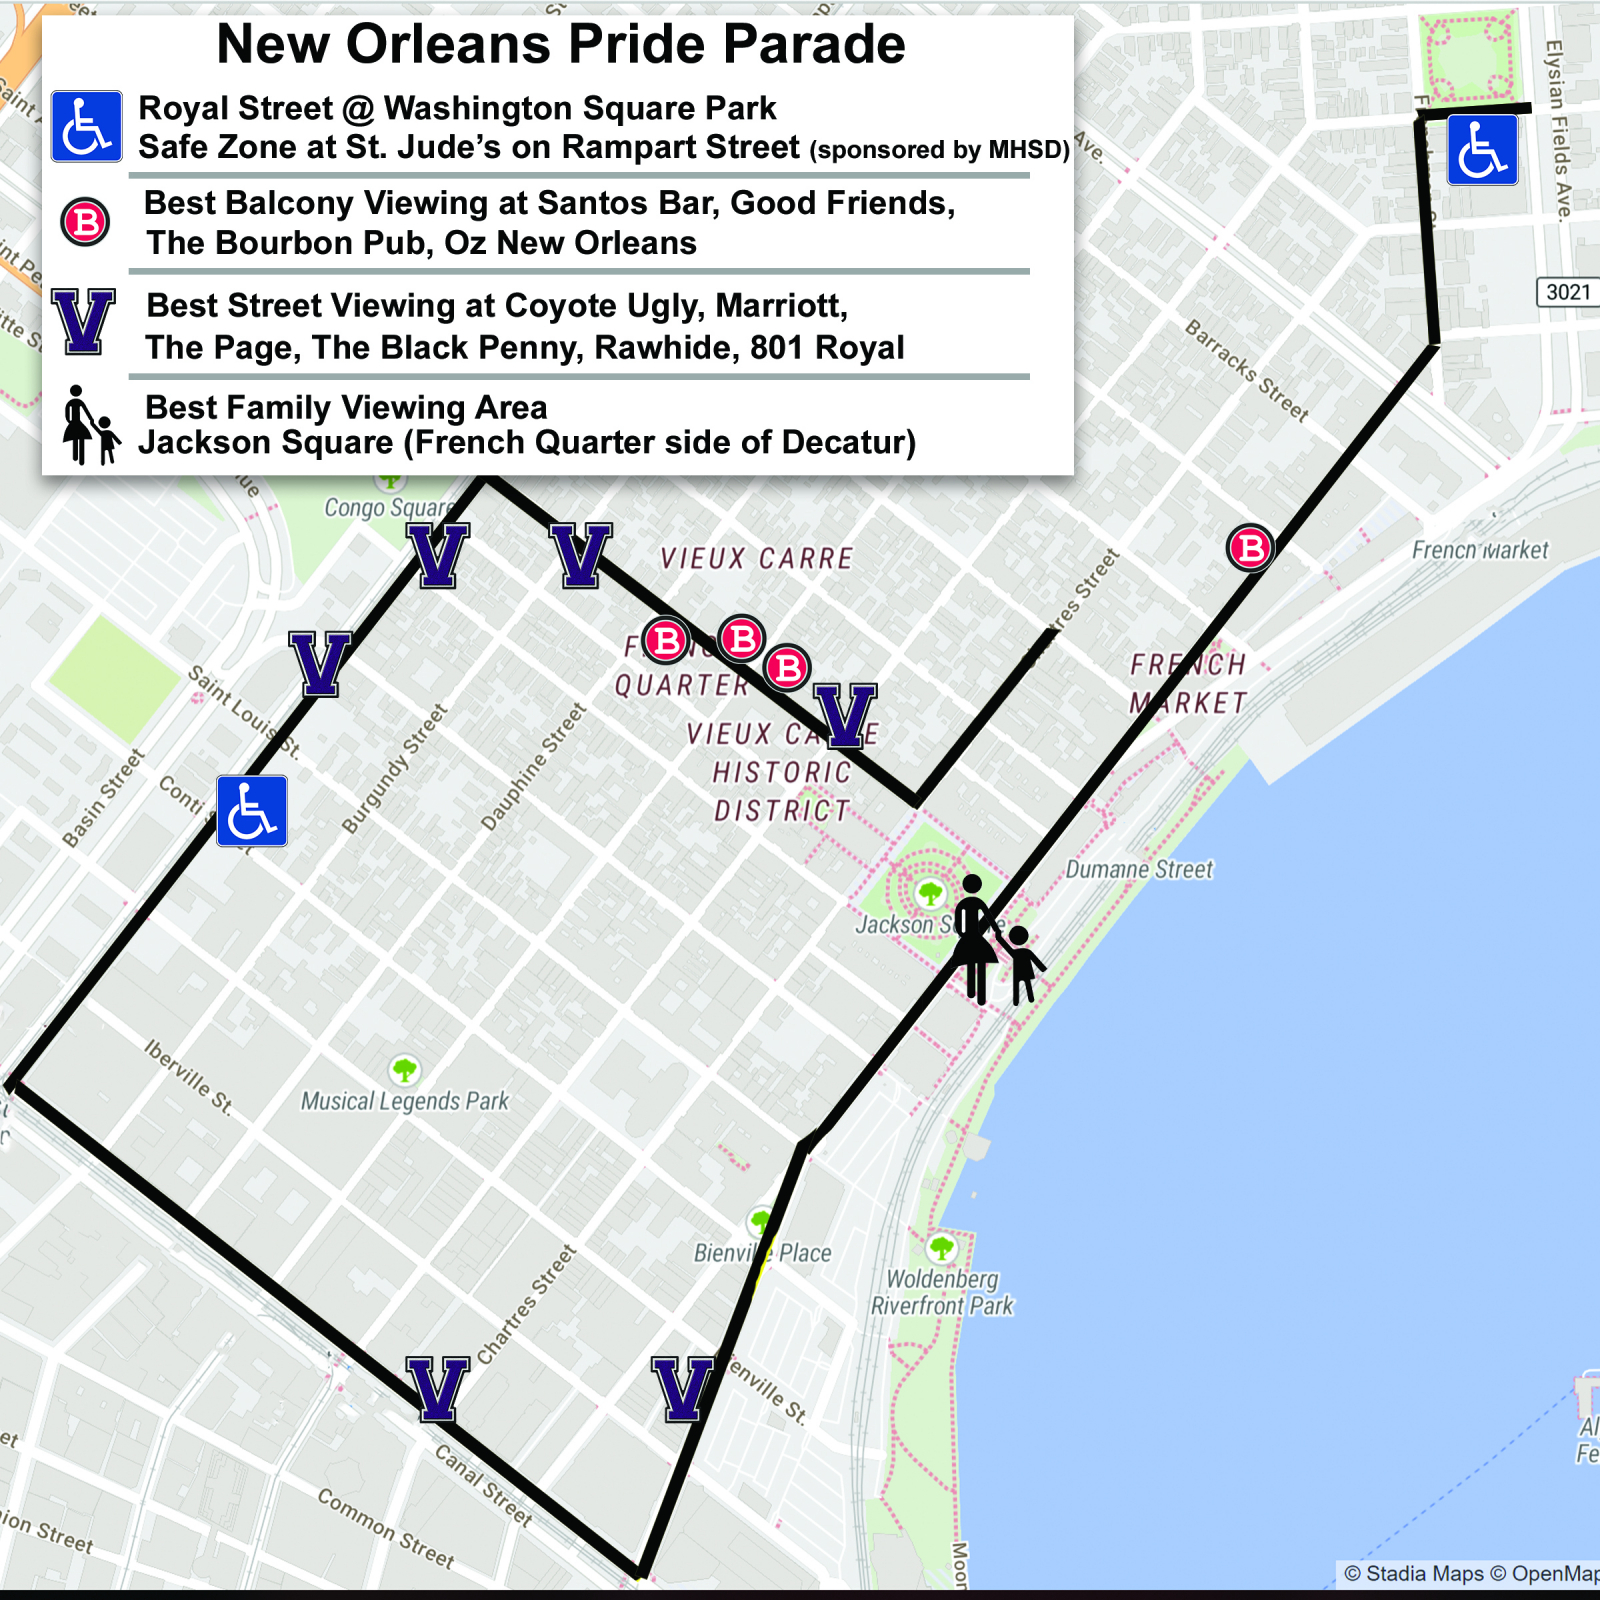 Celebrate New Orleans Pride Parade Route, Best Places to View, Where